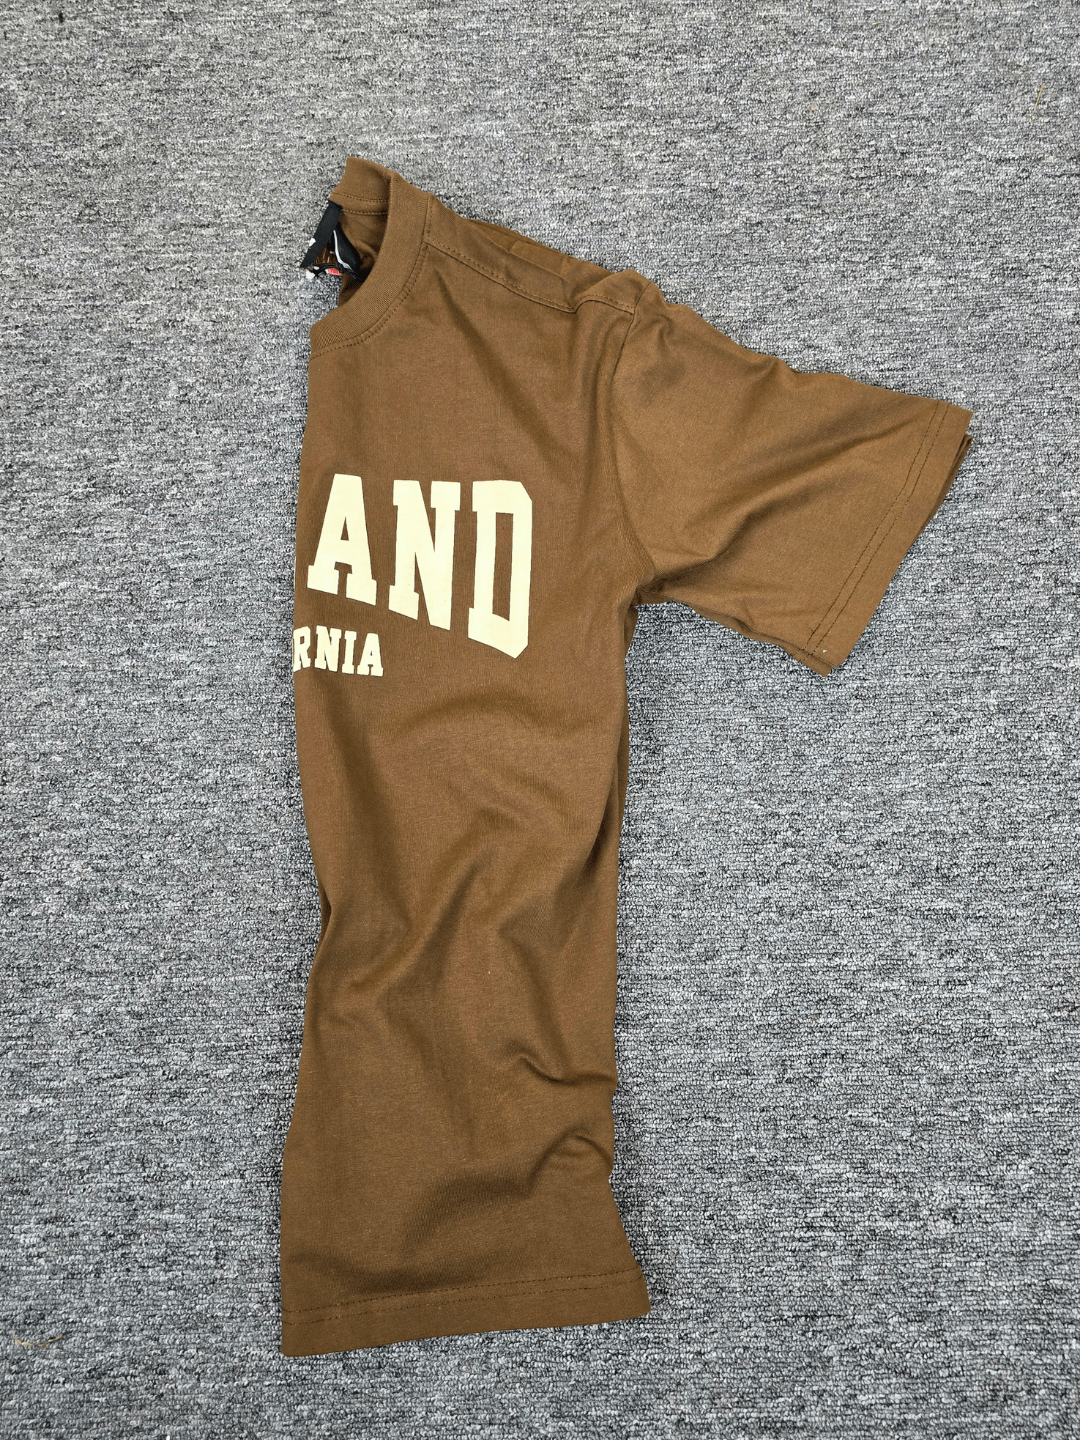 Mensoo New City Over Sized T Shirt Brown